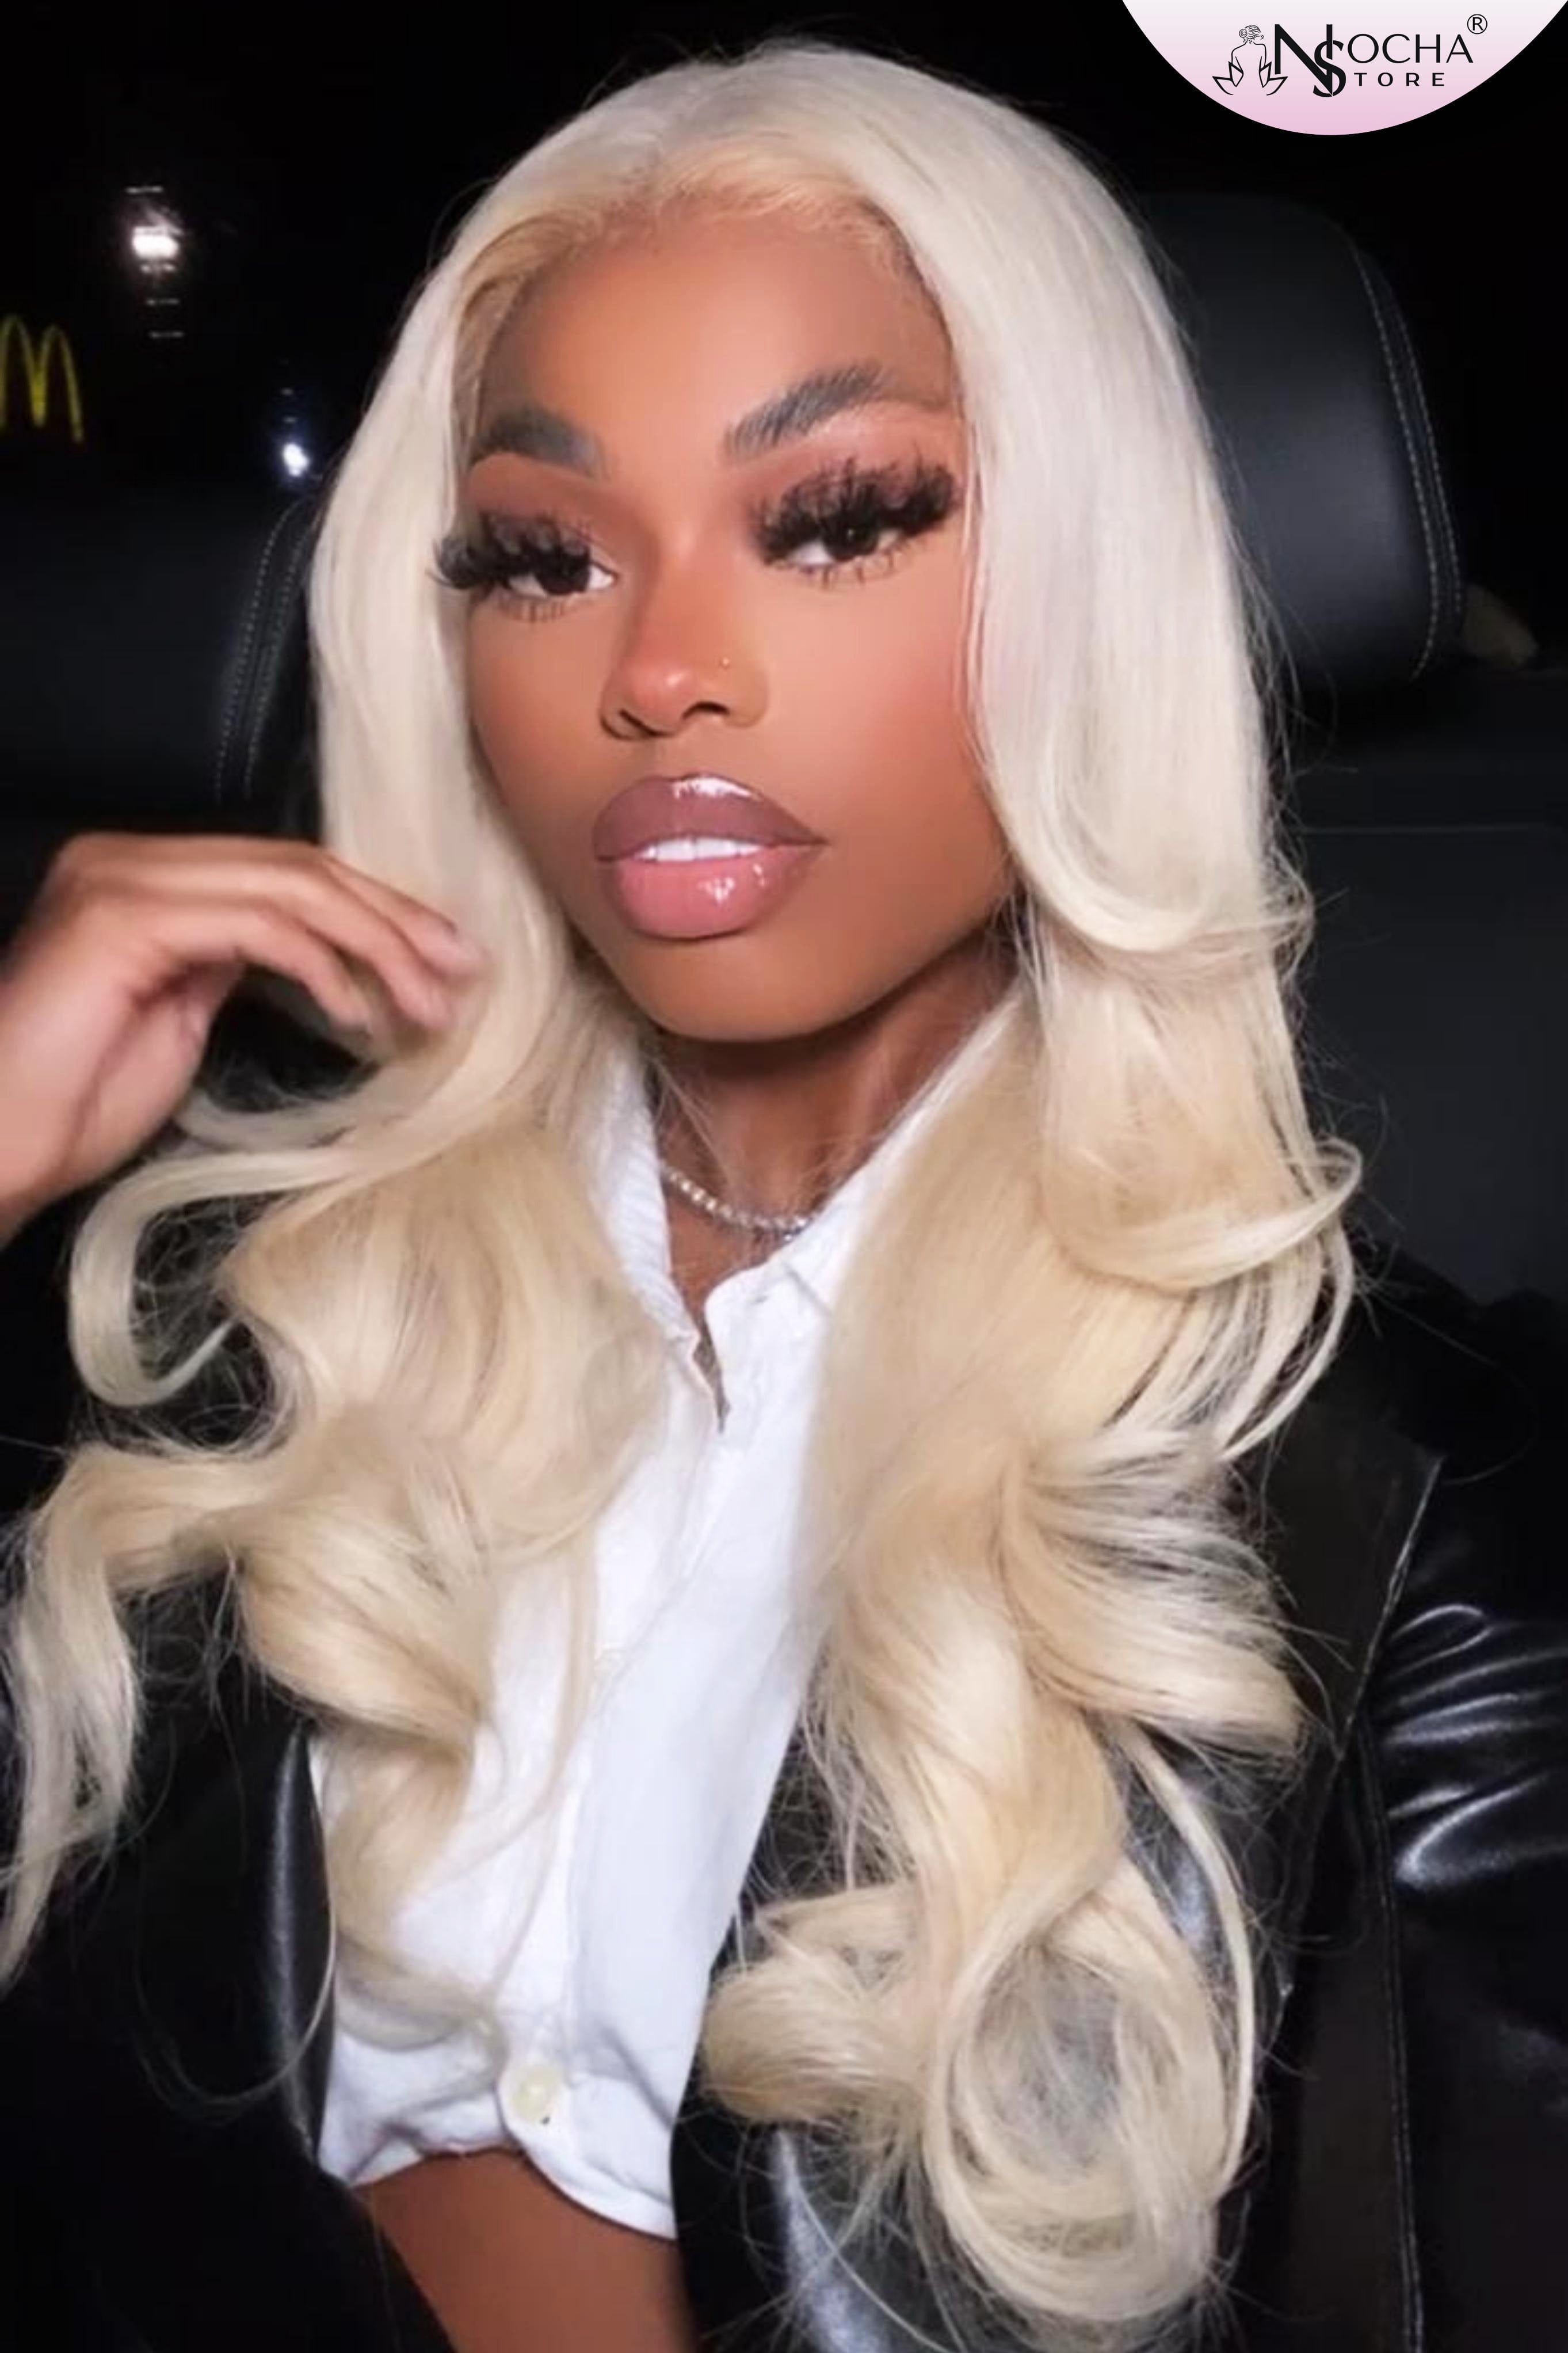 Nocha HD Lace Front Closure #613 Blonde Body Wave Human Hair Wigs